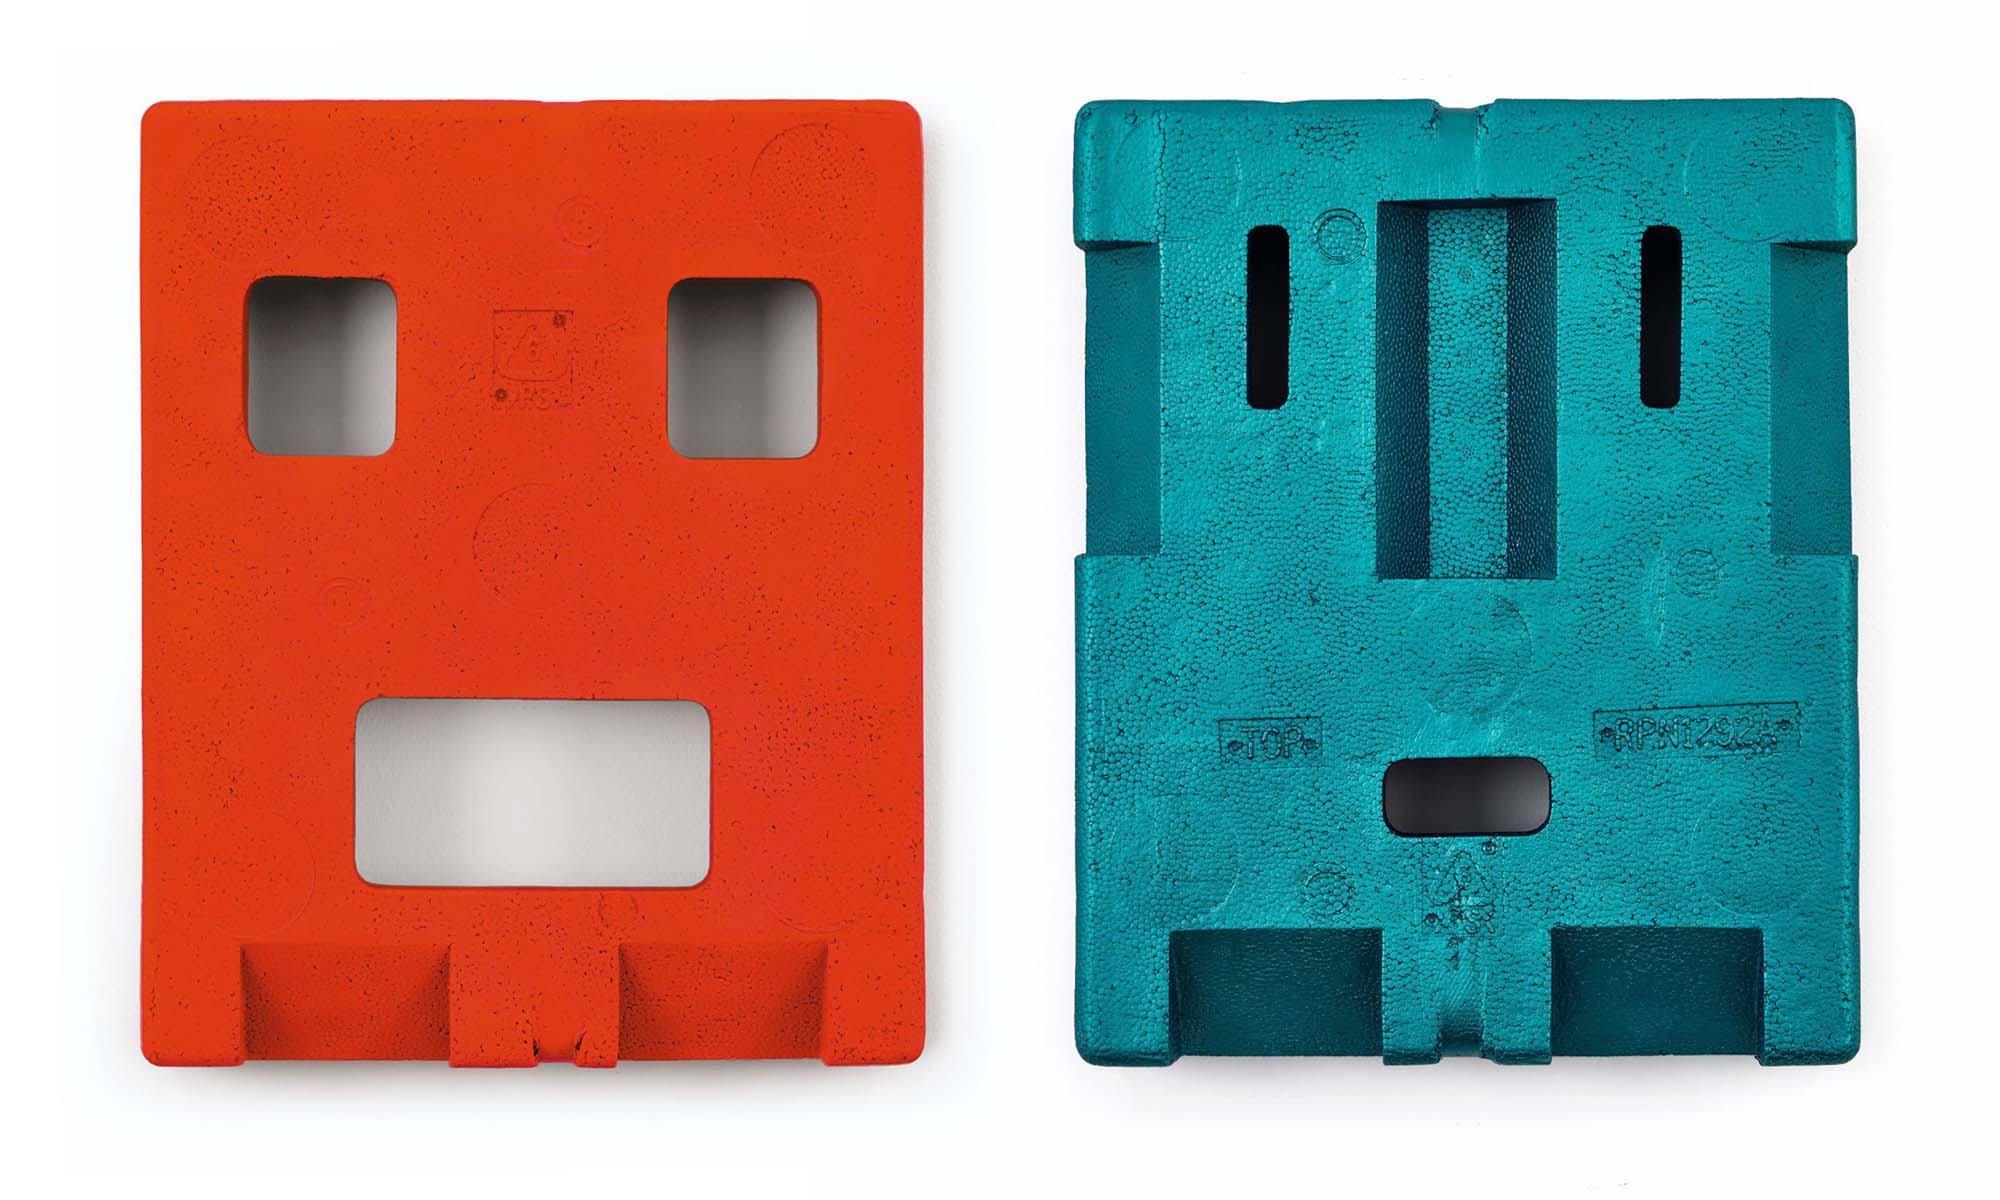 Two bronze casts of polystyrene packaging that resemble faces or masks. One is painted a bright orangey-red, the other a metallic turquoise. 